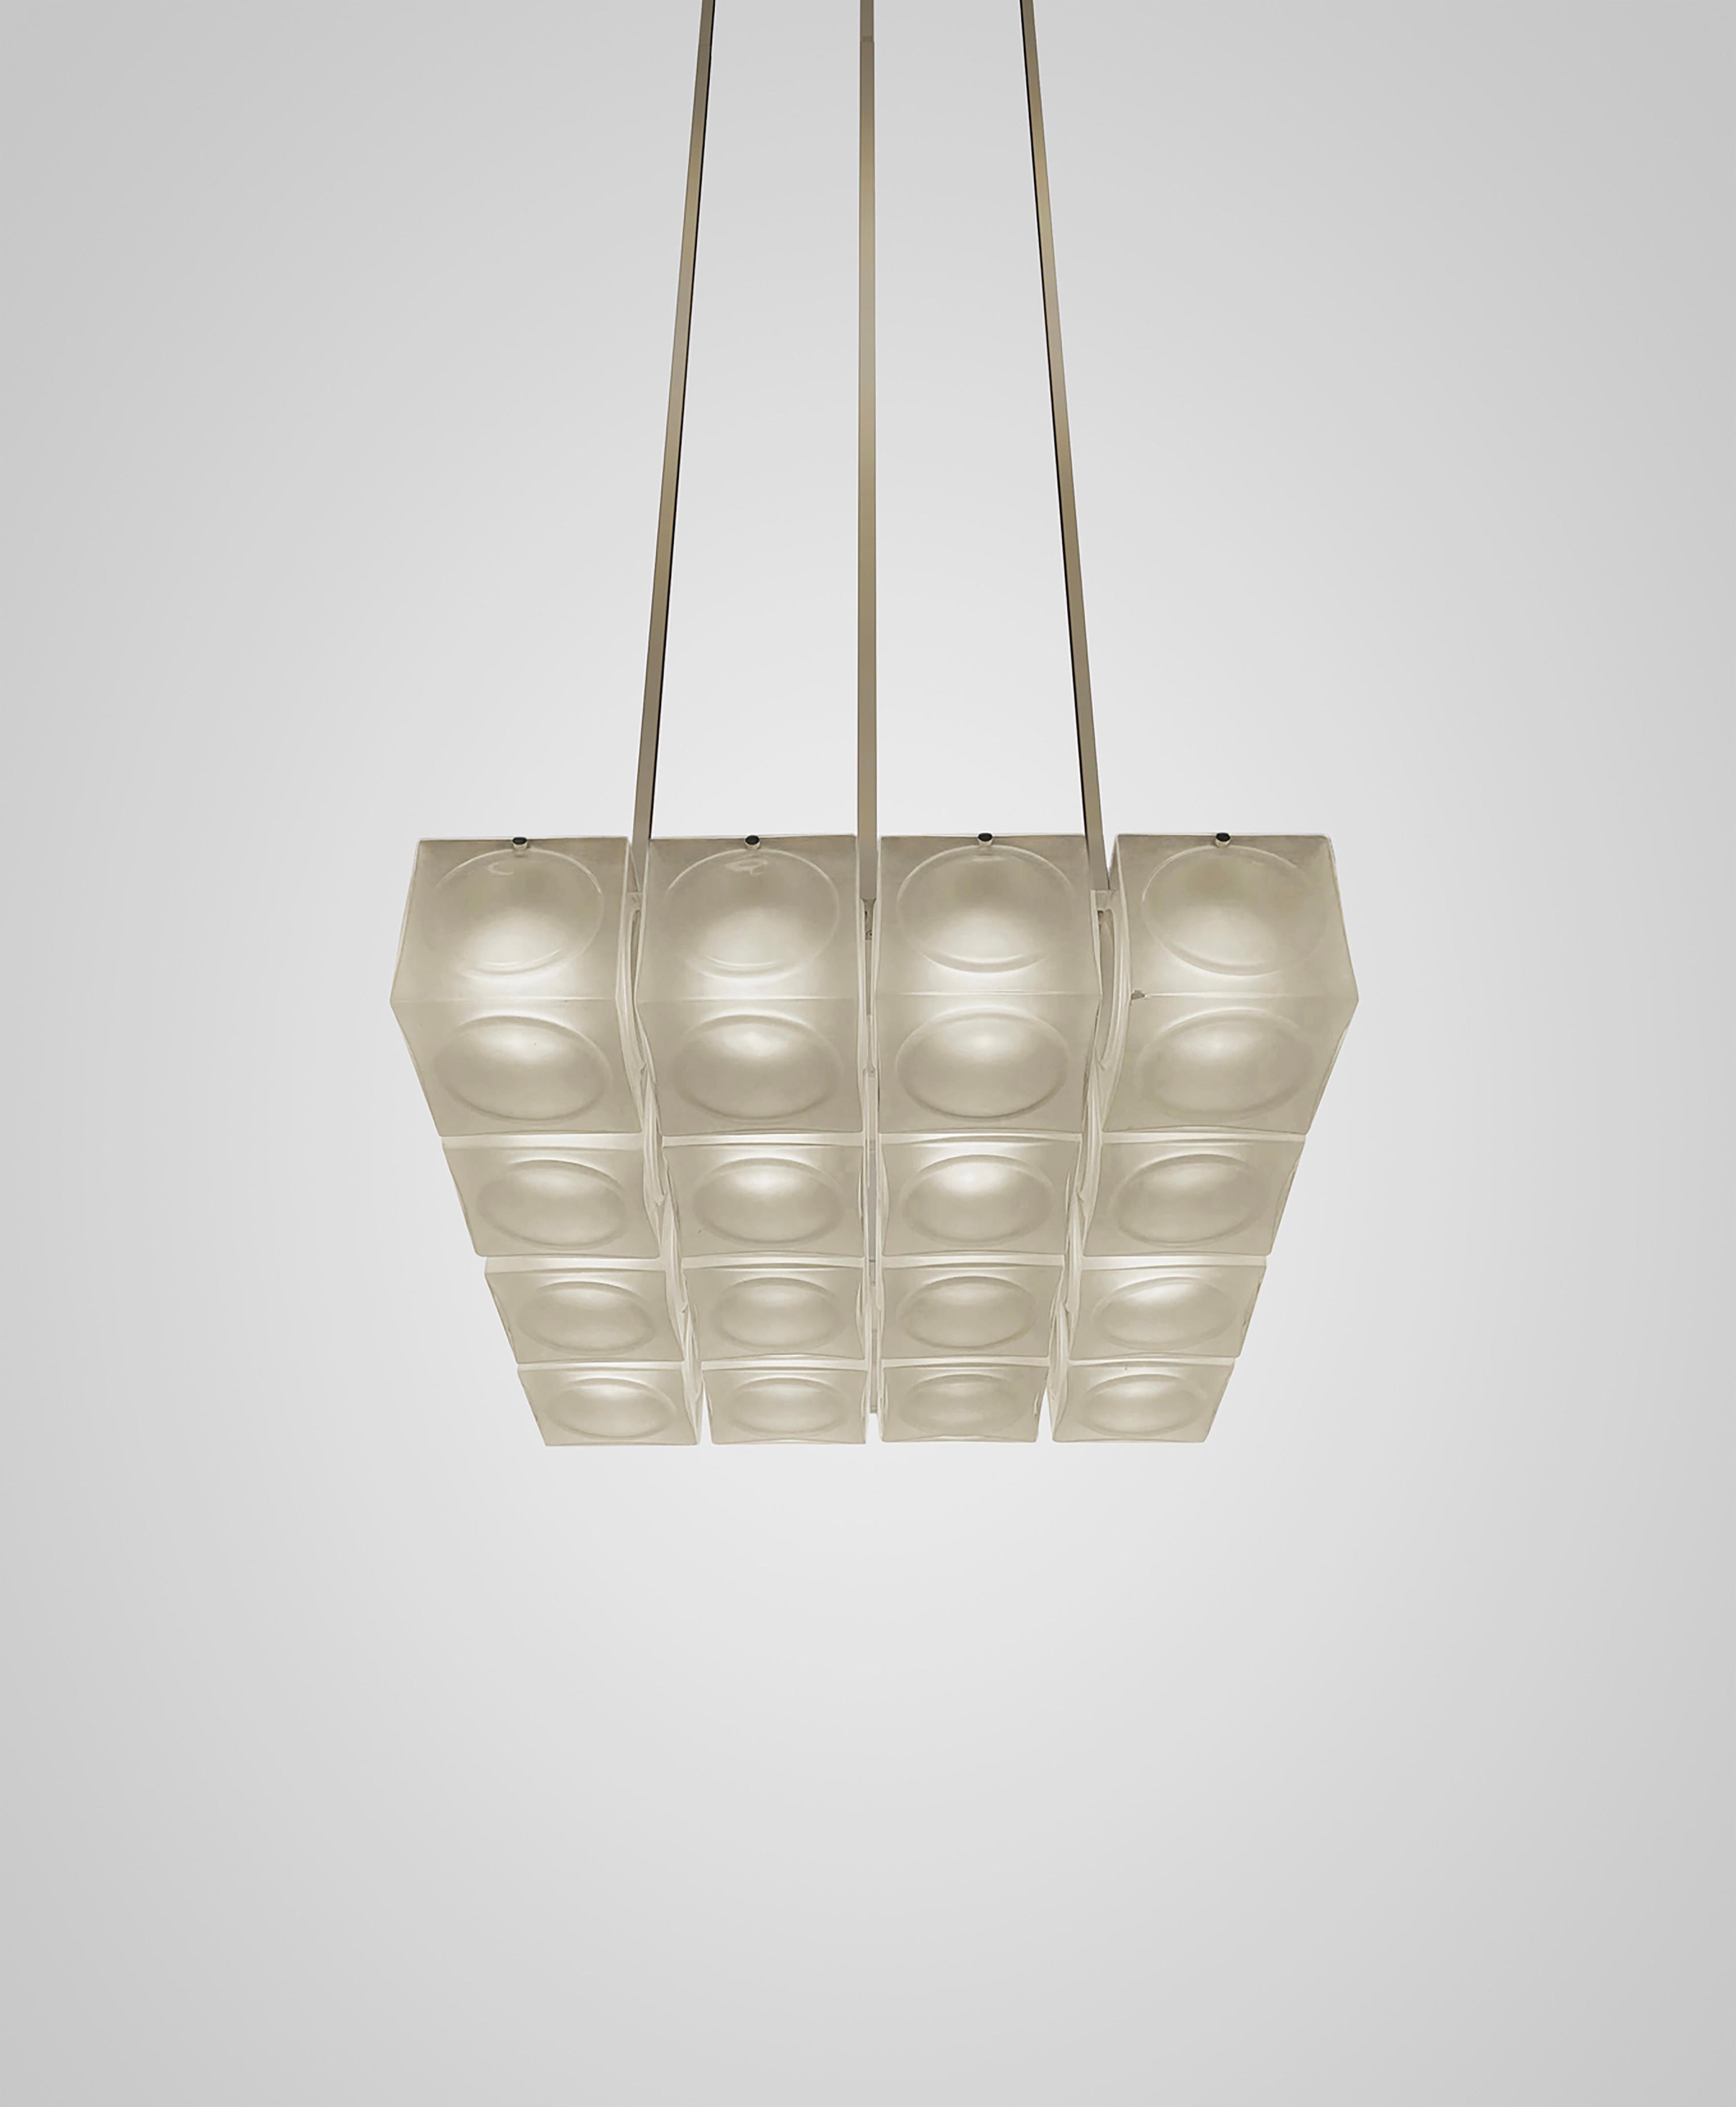 Inspired by the pressed glass bricks often used as an alternative to stained glass in places of worship during the 1970s, Chant is formed of blown glass cubes with a pronounced circular detail in either clear or frosted glass. 

Constructed in